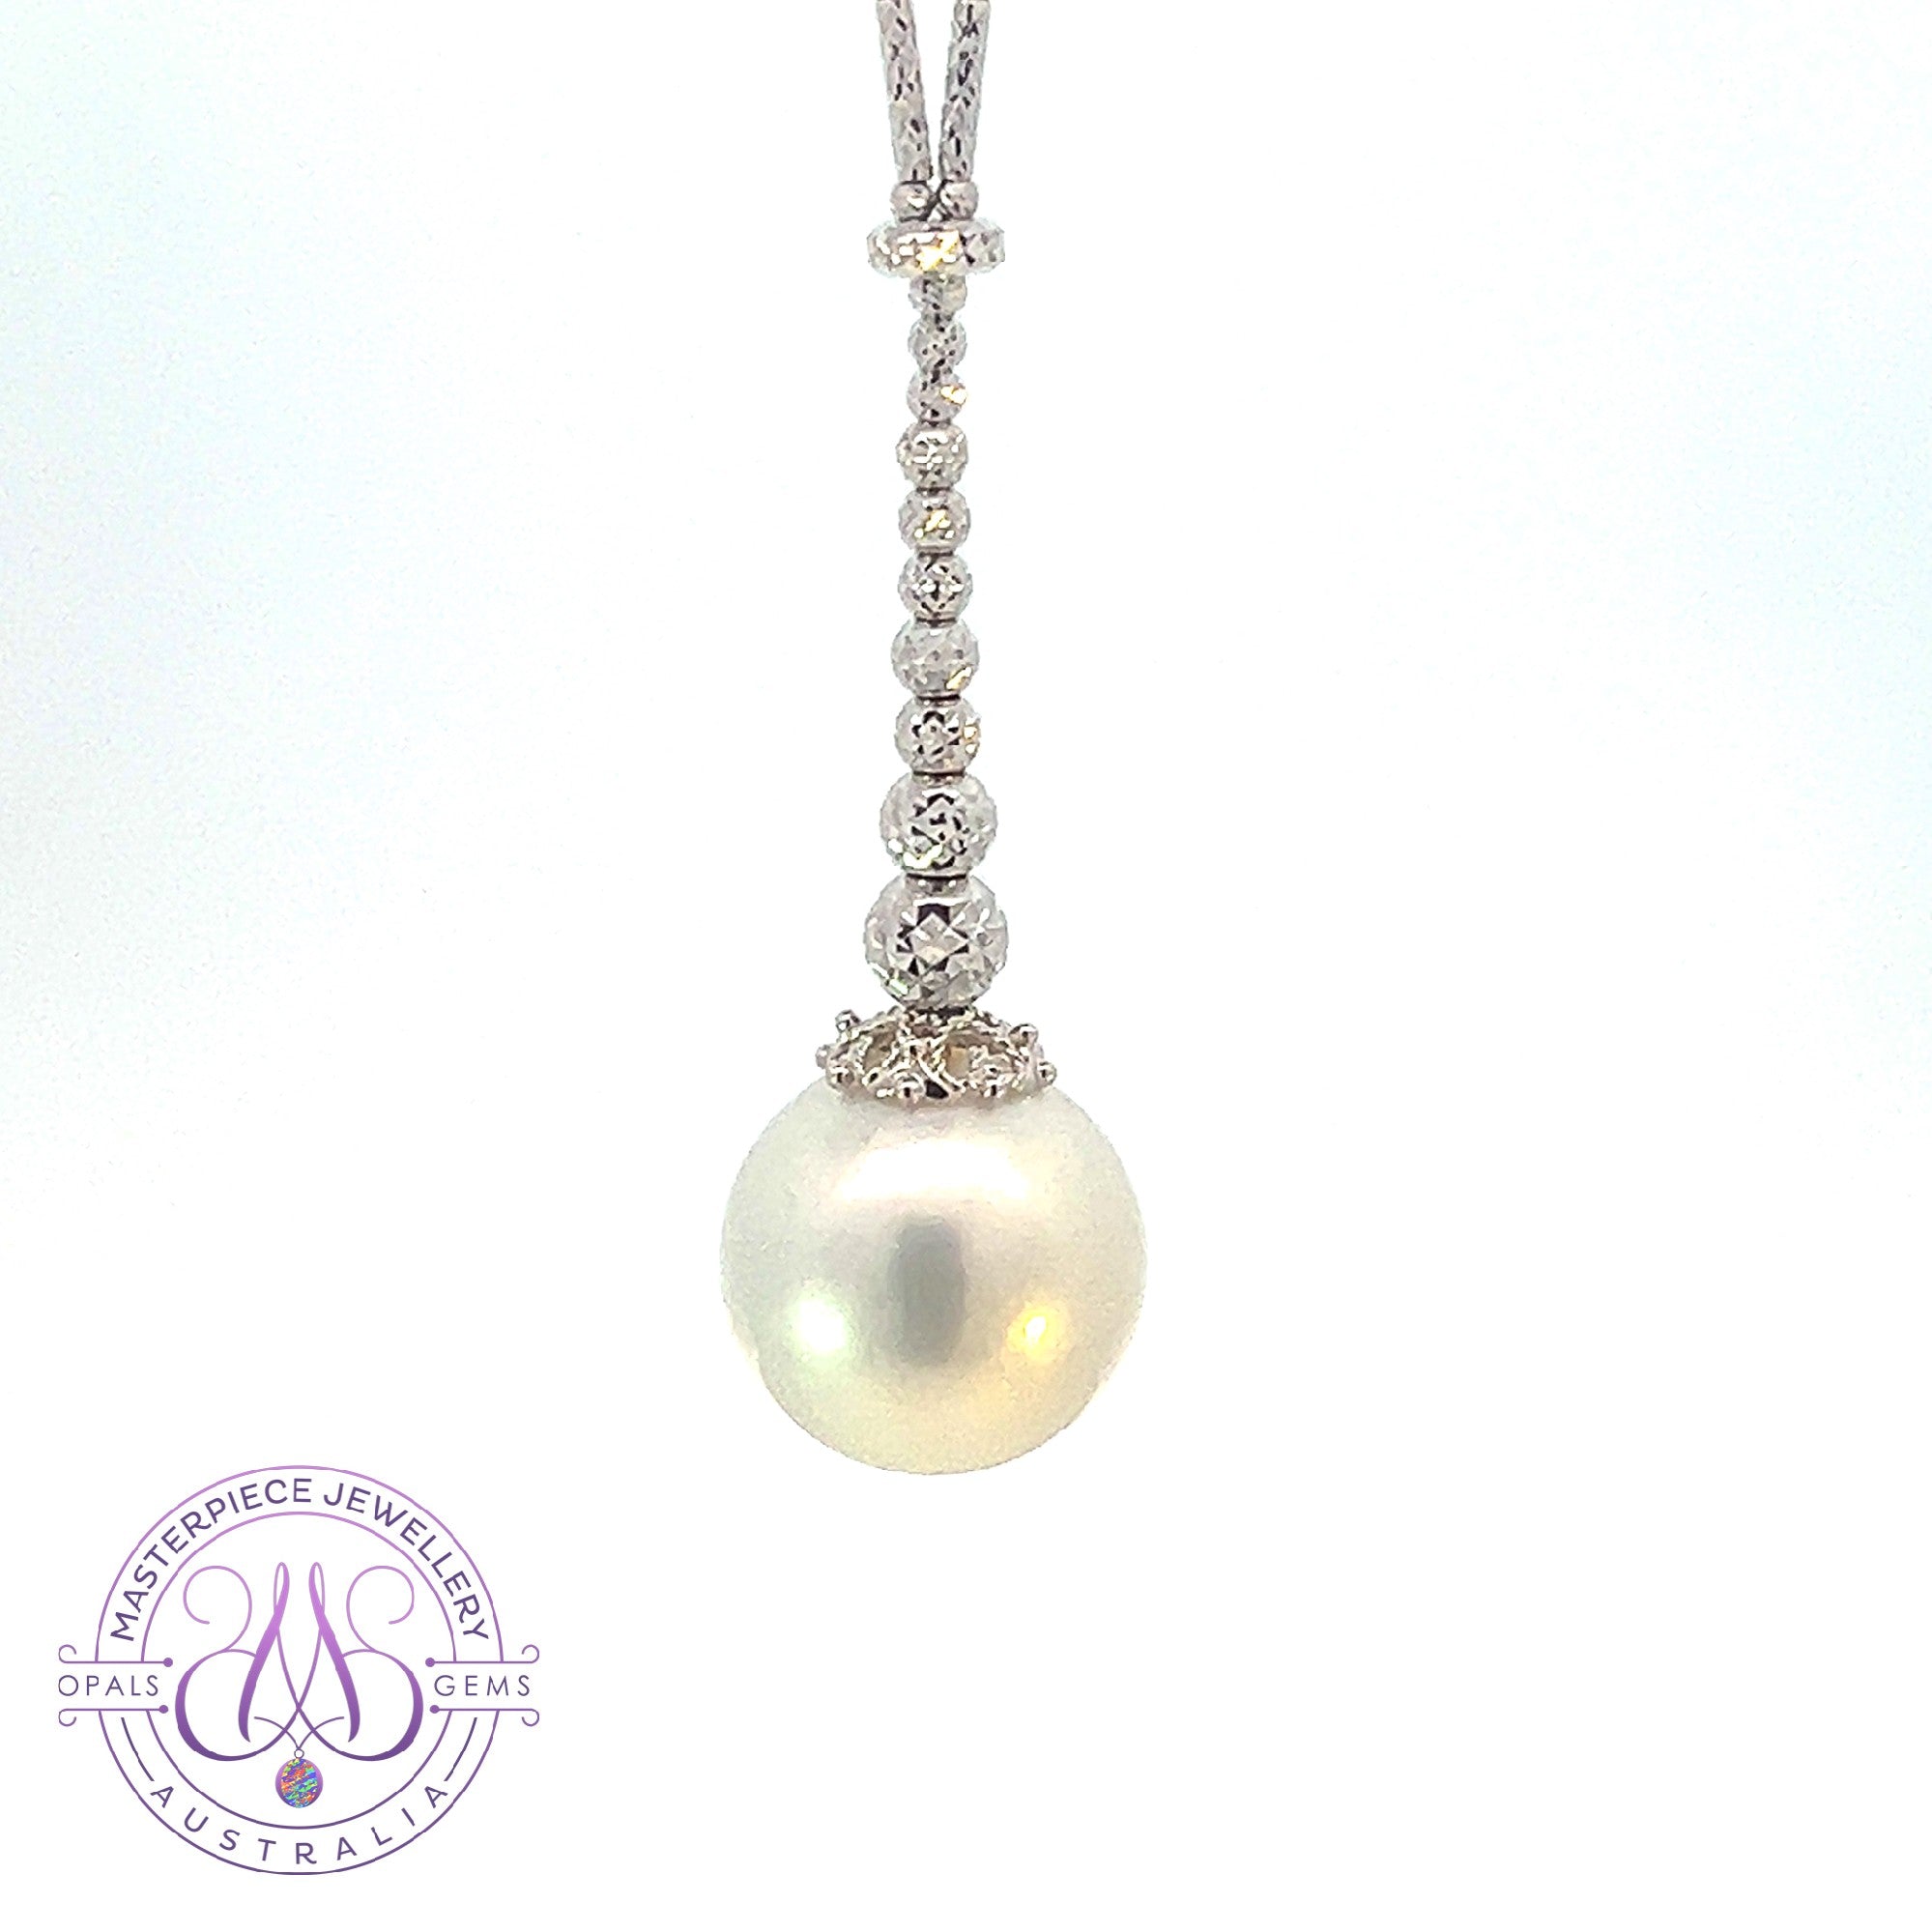 18kt White Gold diamond cut necklace with South Sea Pearl wire style